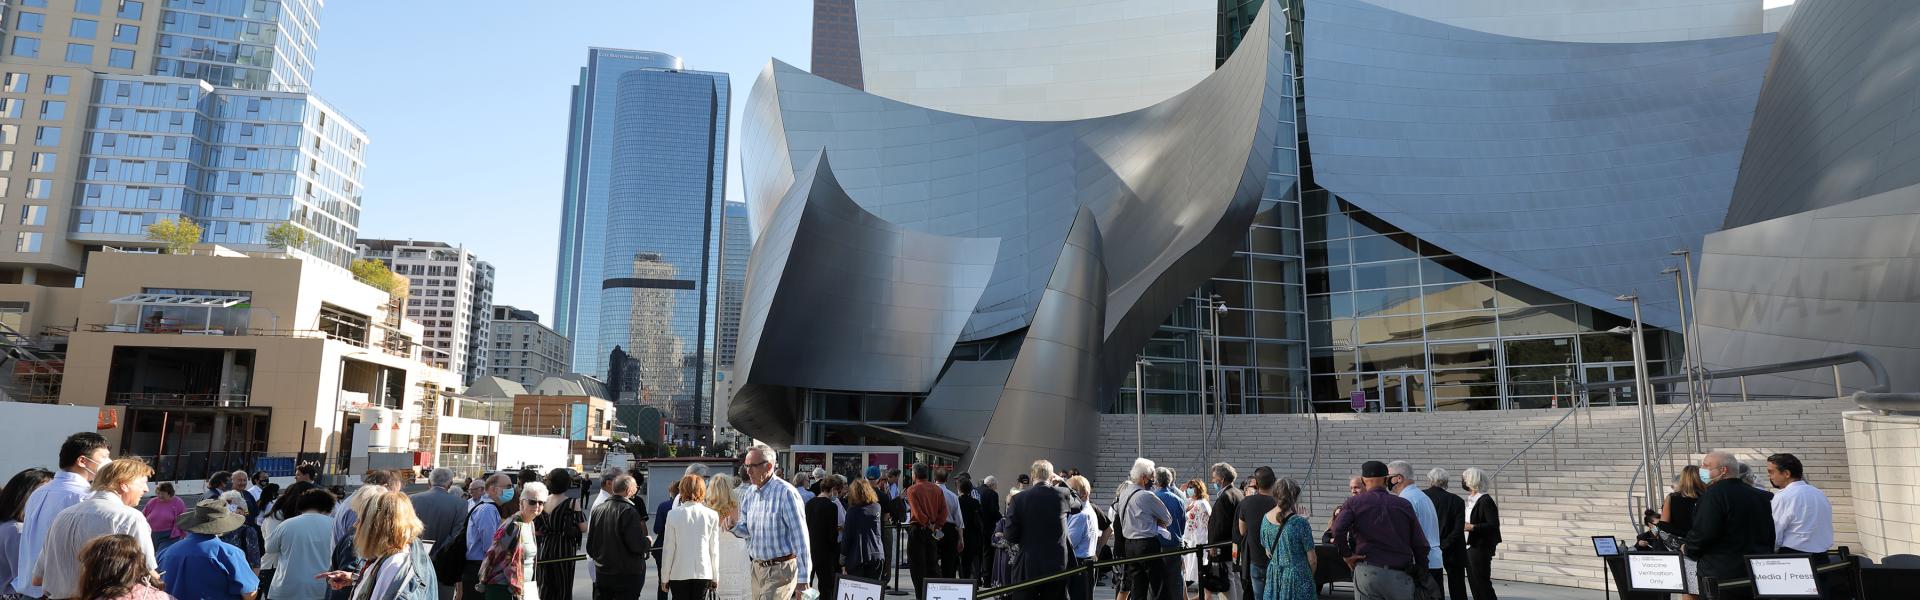 Crowd outside at Disney Hall